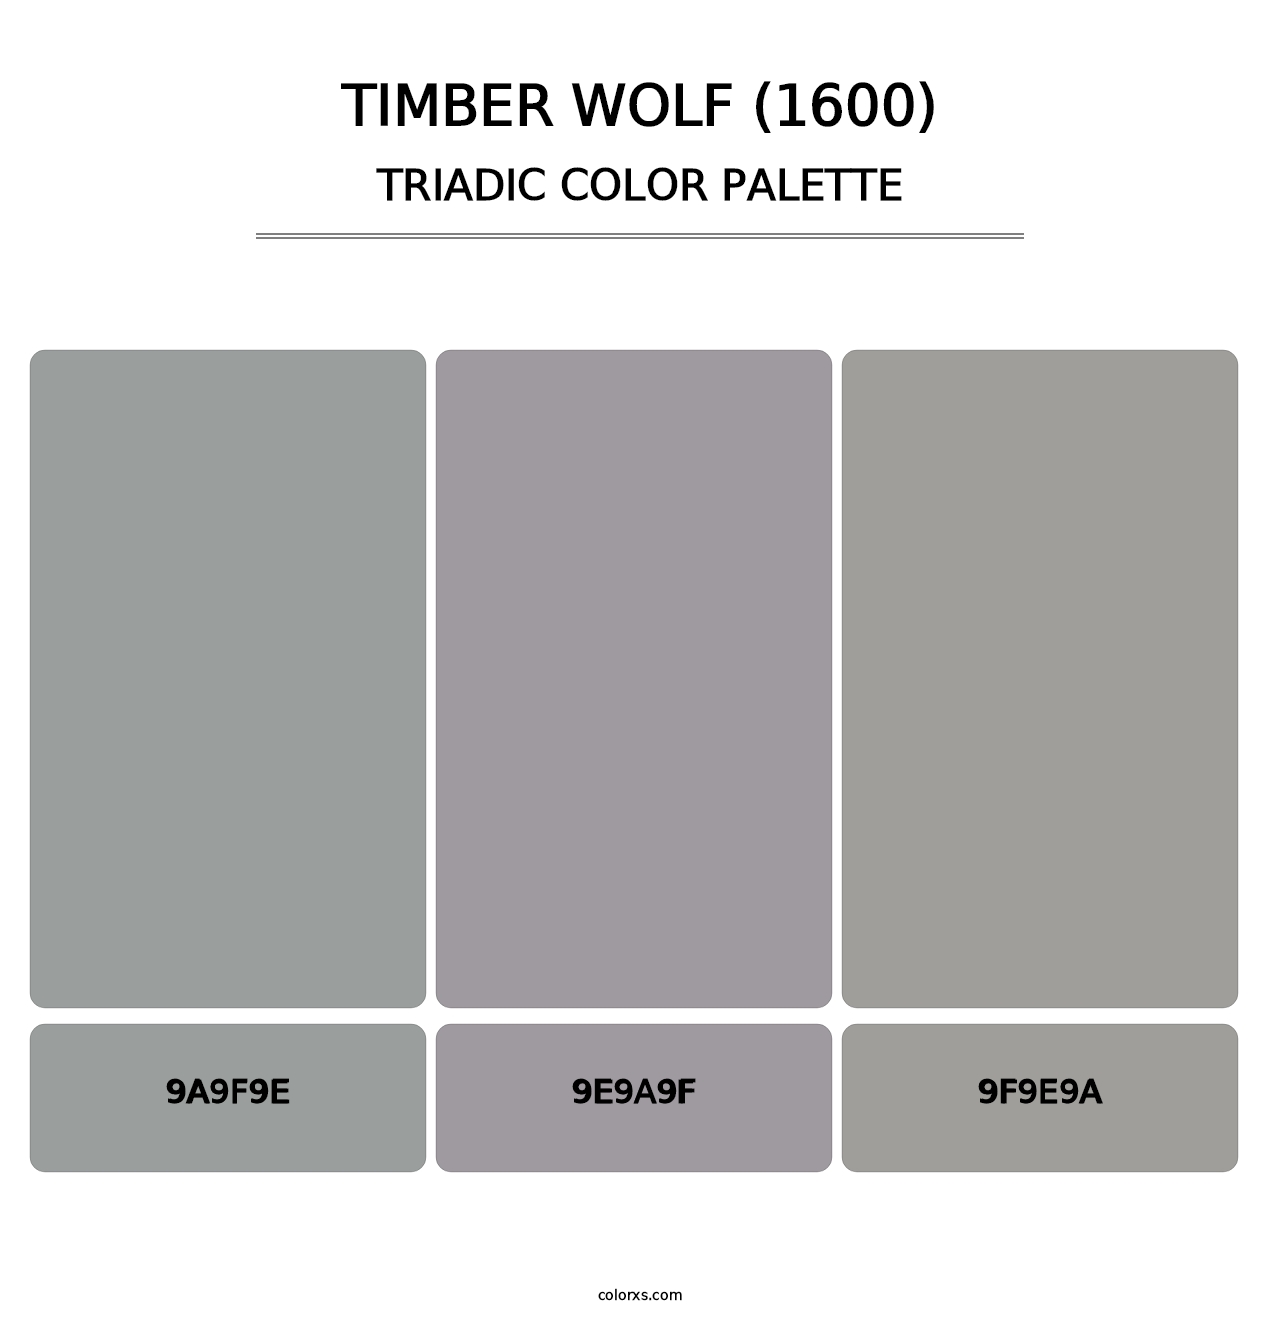 Timber Wolf (1600) - Triadic Color Palette